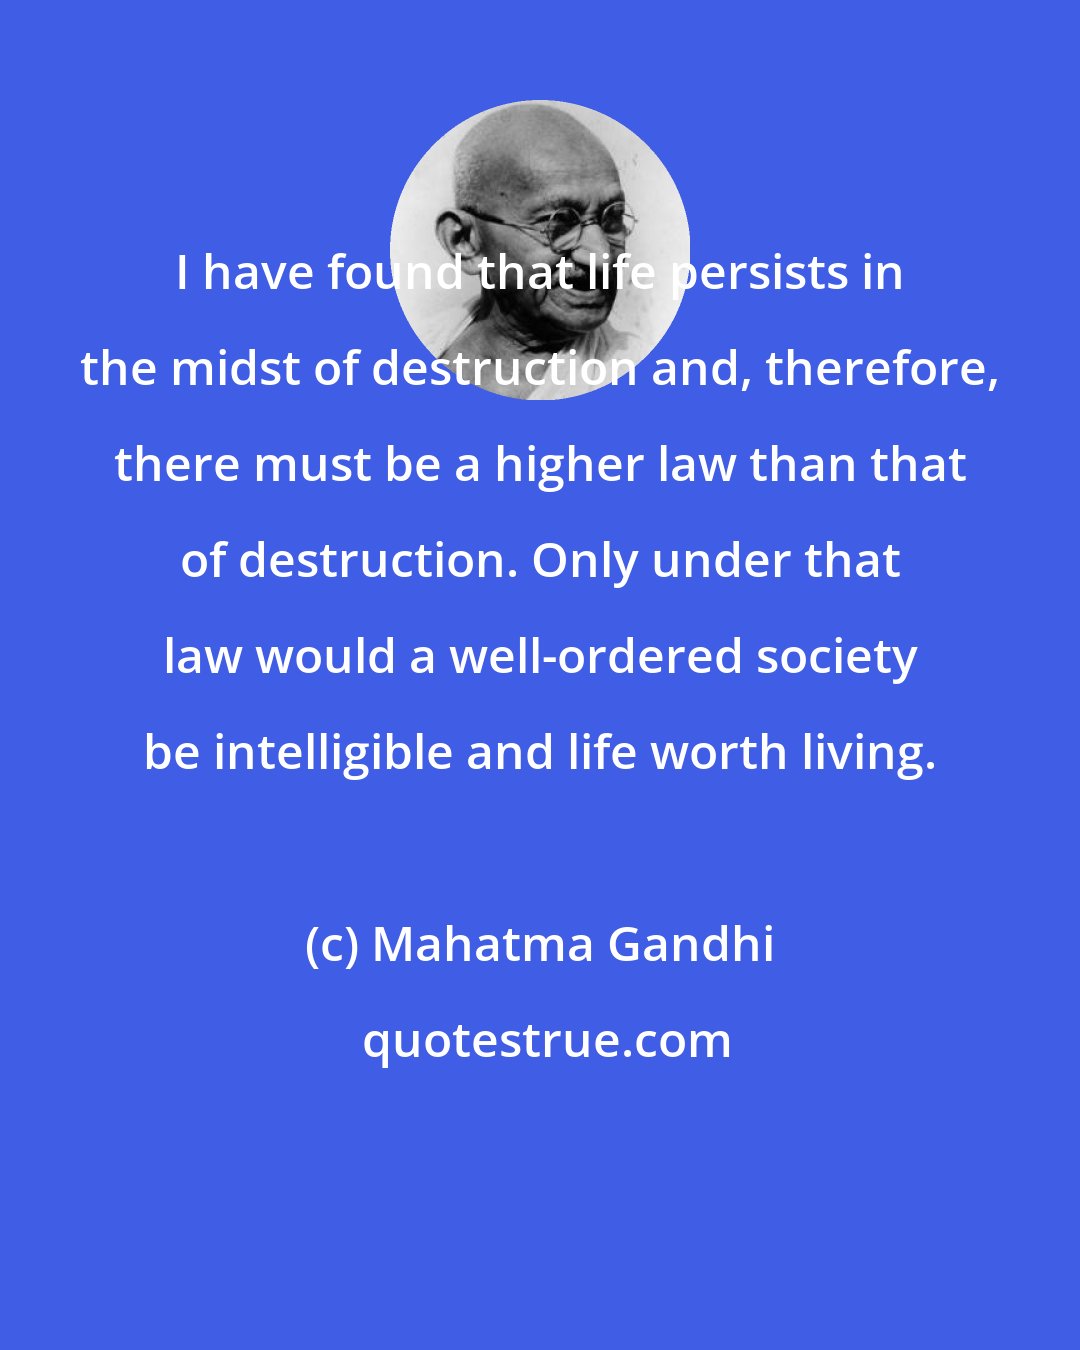 Mahatma Gandhi: I have found that life persists in the midst of destruction and, therefore, there must be a higher law than that of destruction. Only under that law would a well-ordered society be intelligible and life worth living.